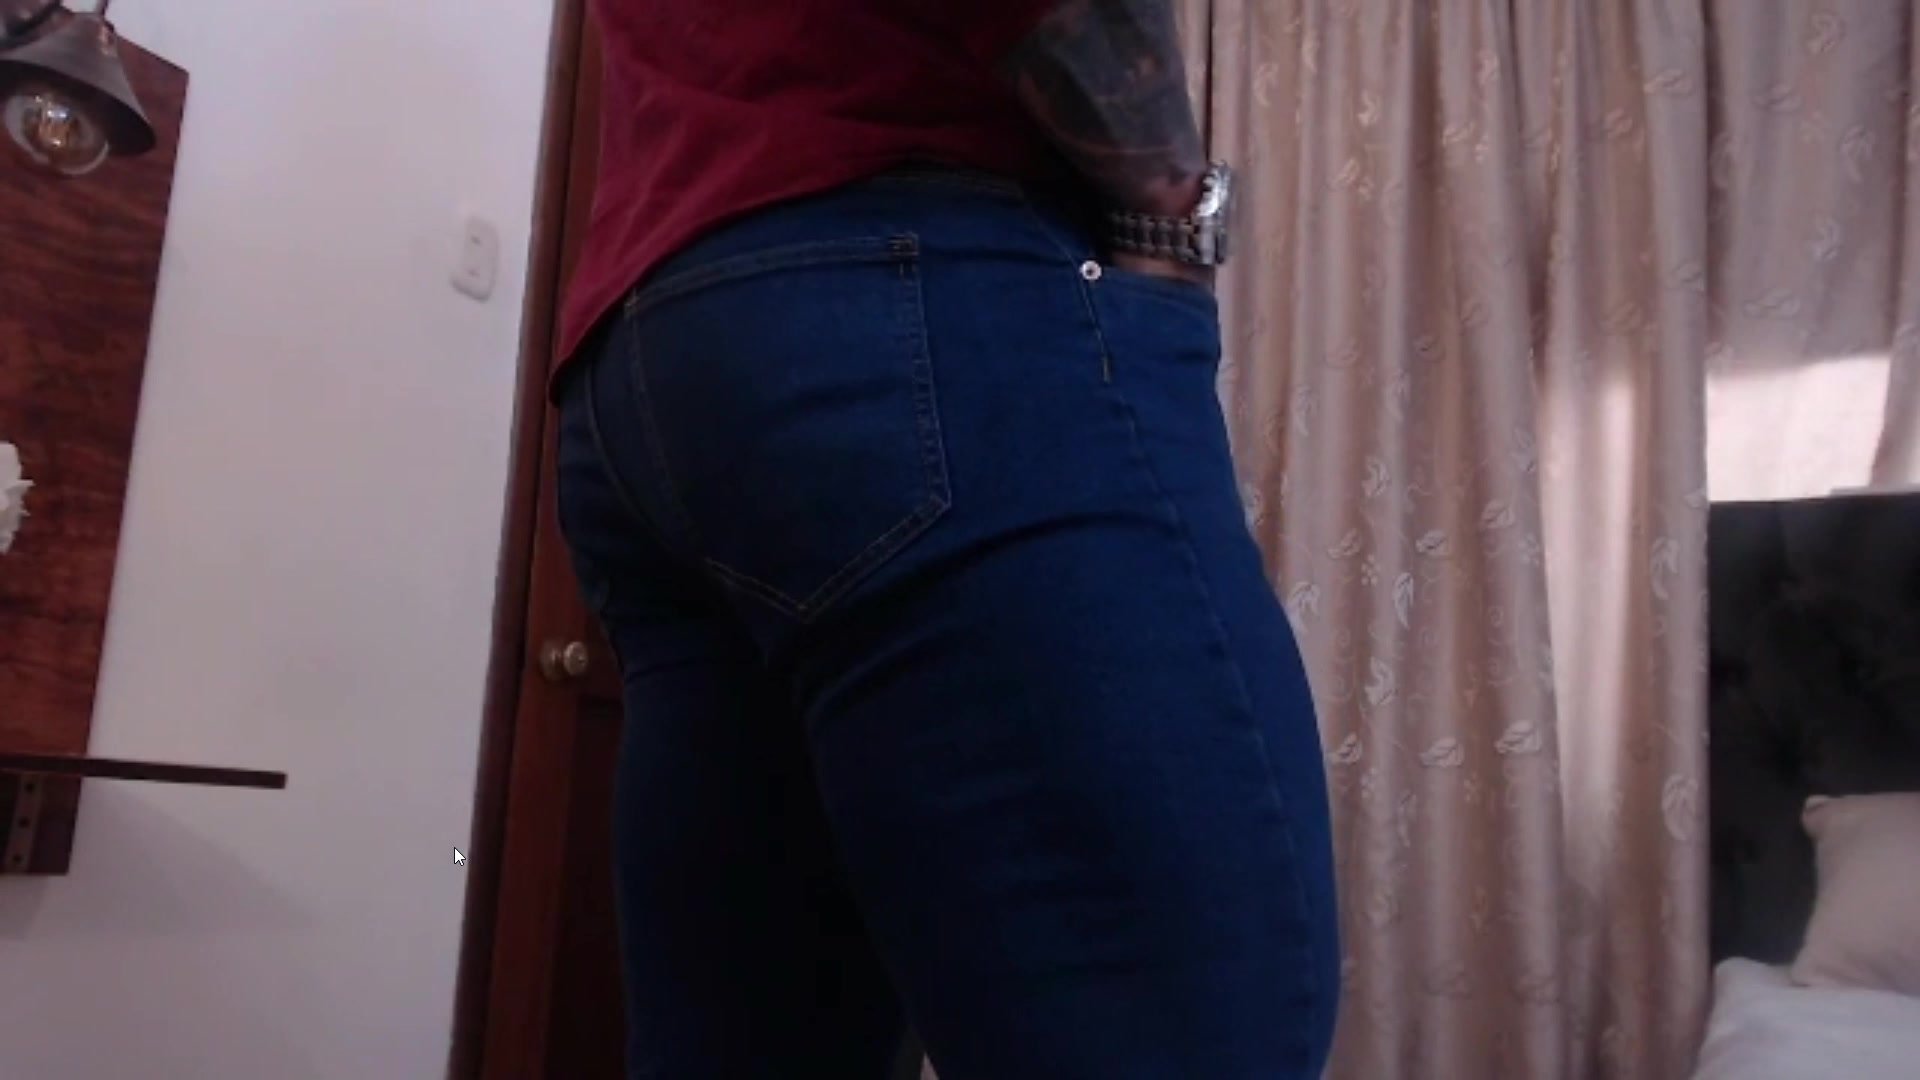 Muscle butt in tight jeans